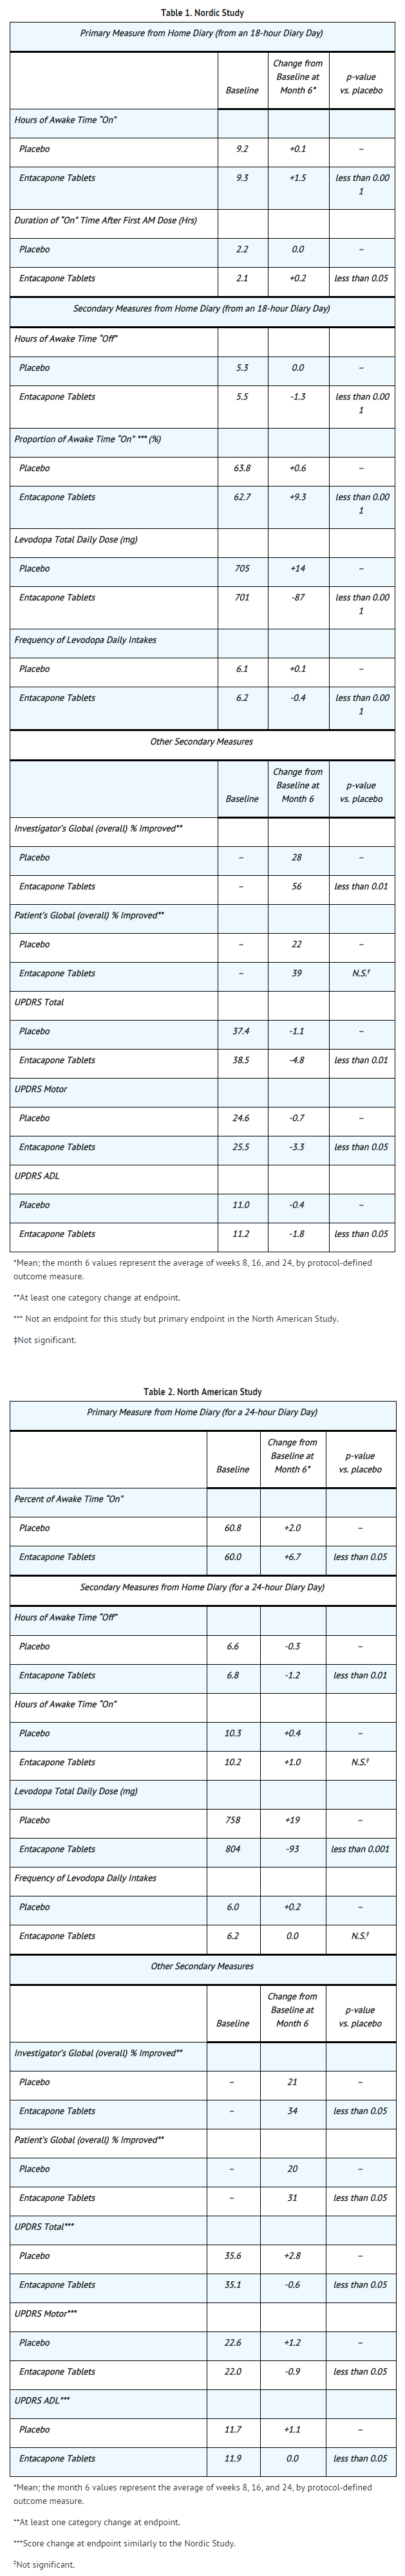 File:Entacapone Clinical Studies Table 1,2.png